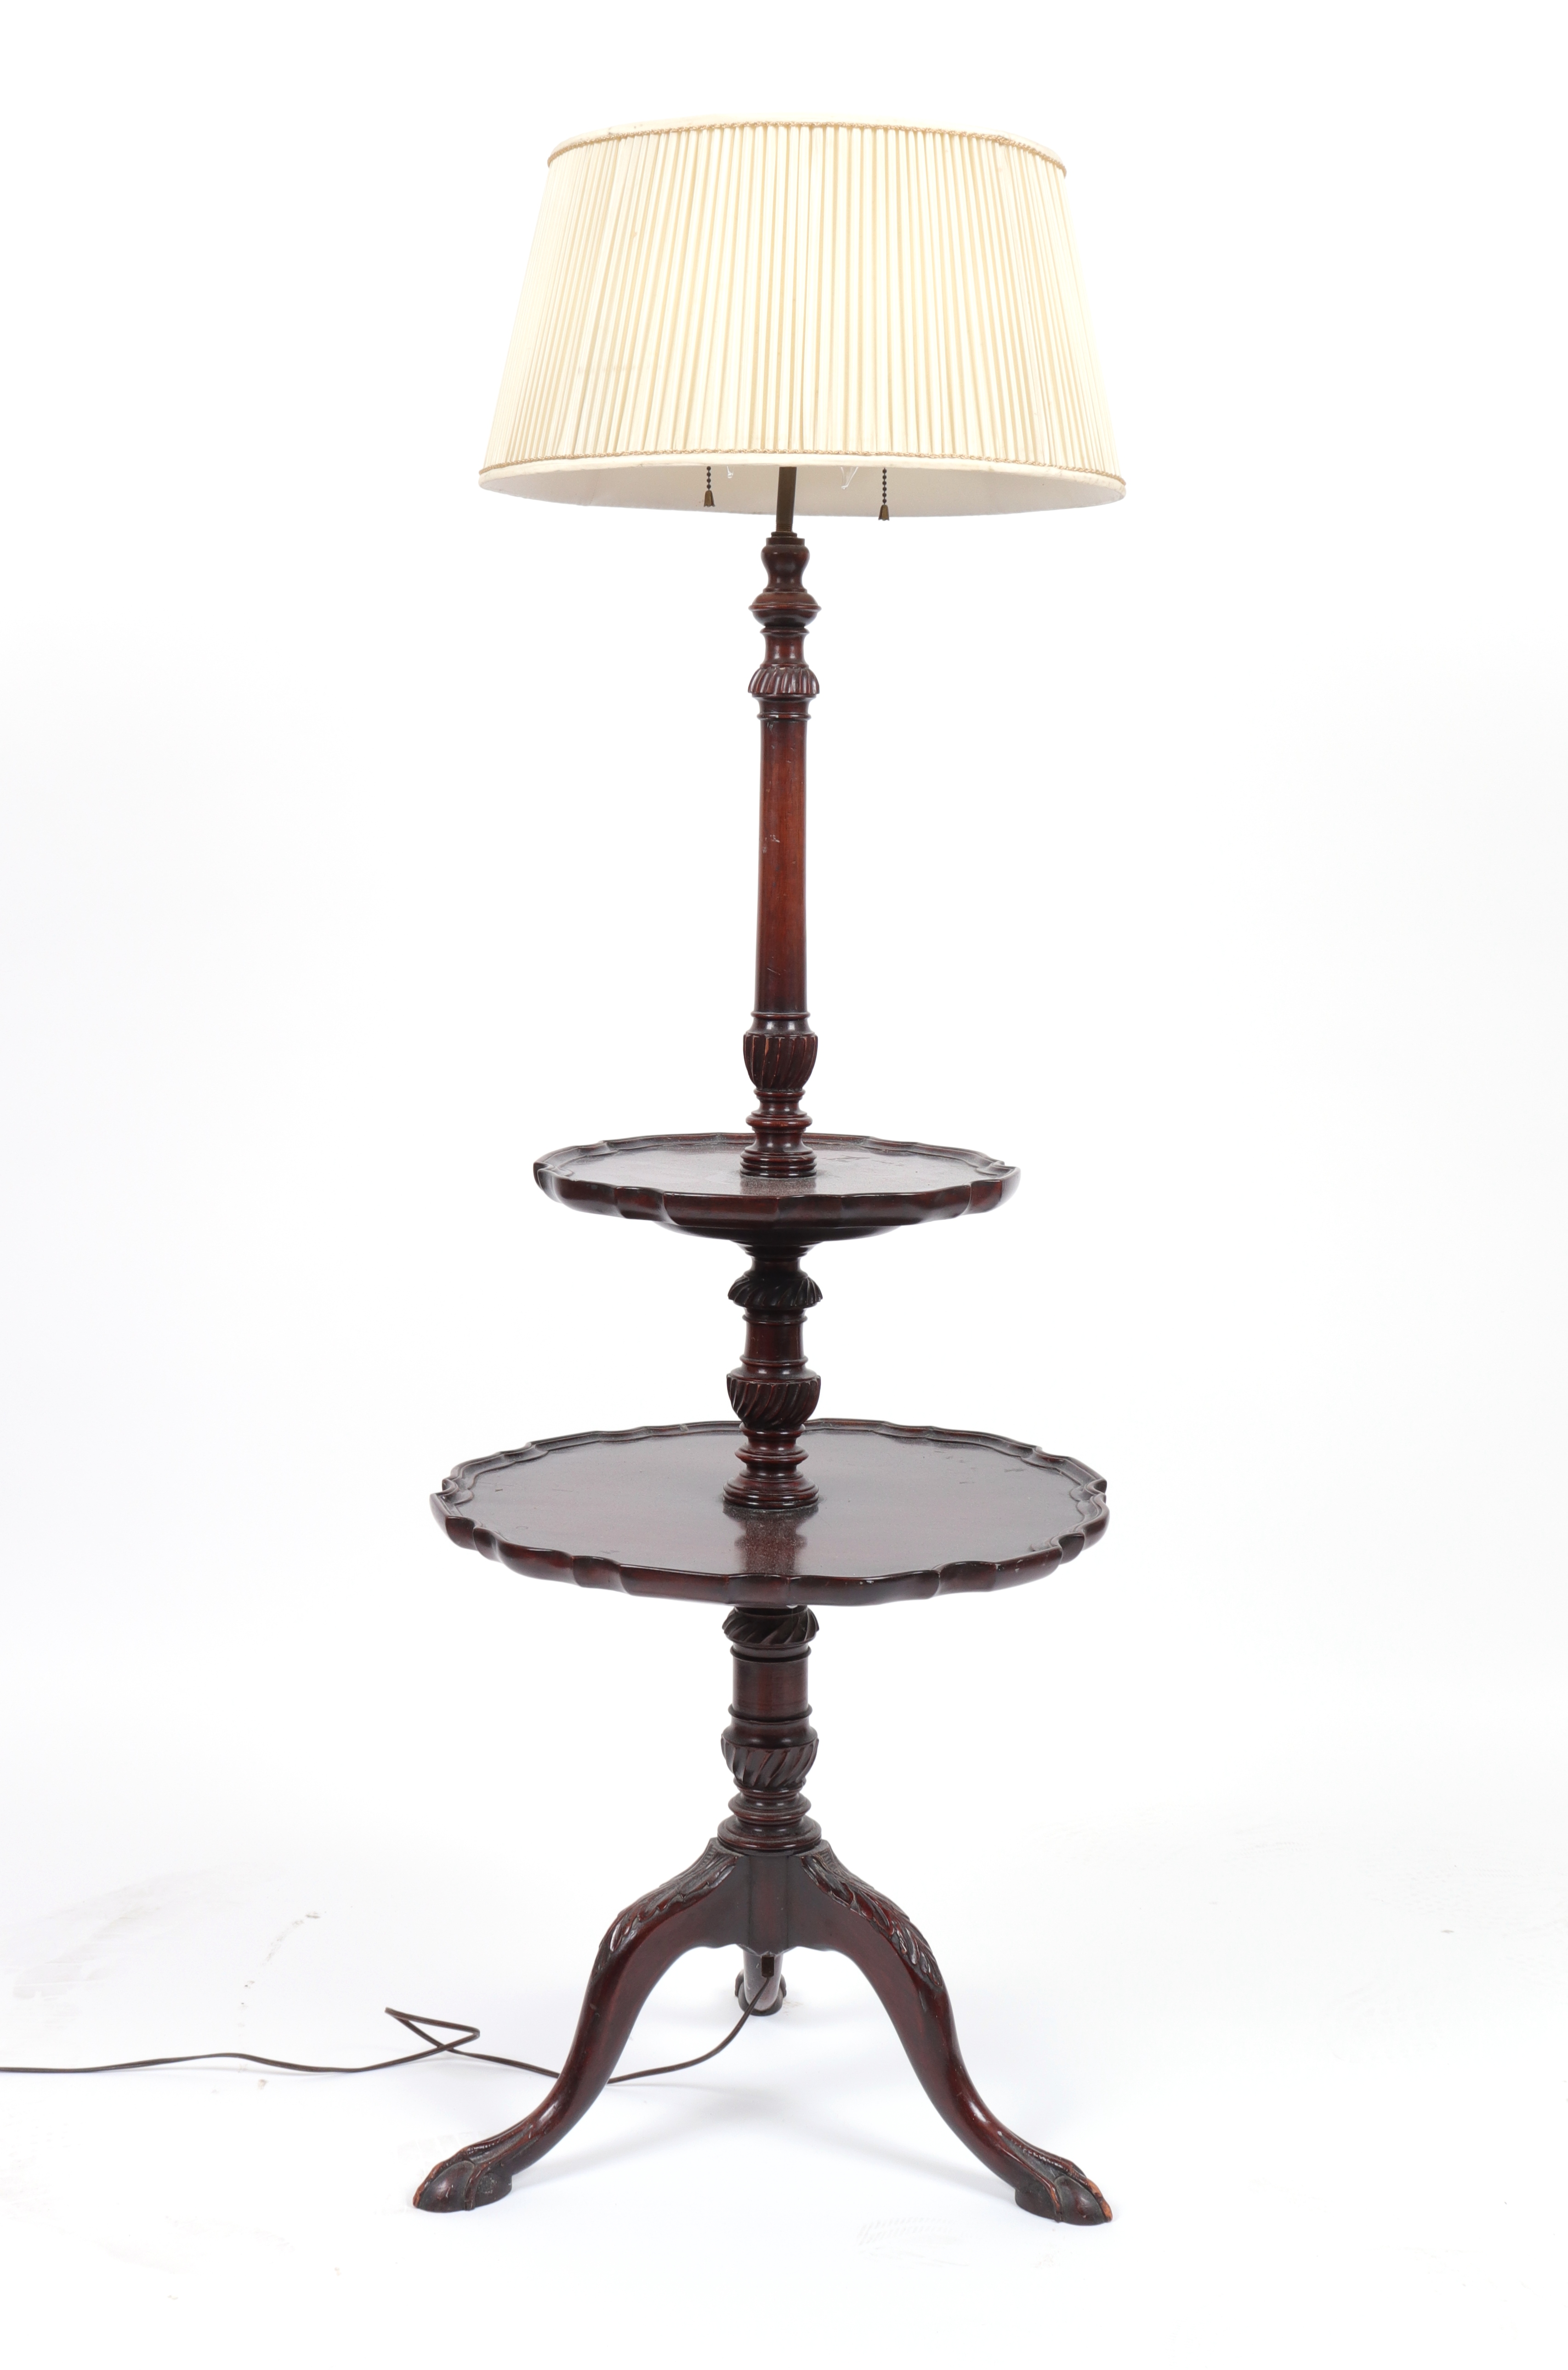 CHIPPENDALE STYLE FLOOR LAMP WITH 3c37a6